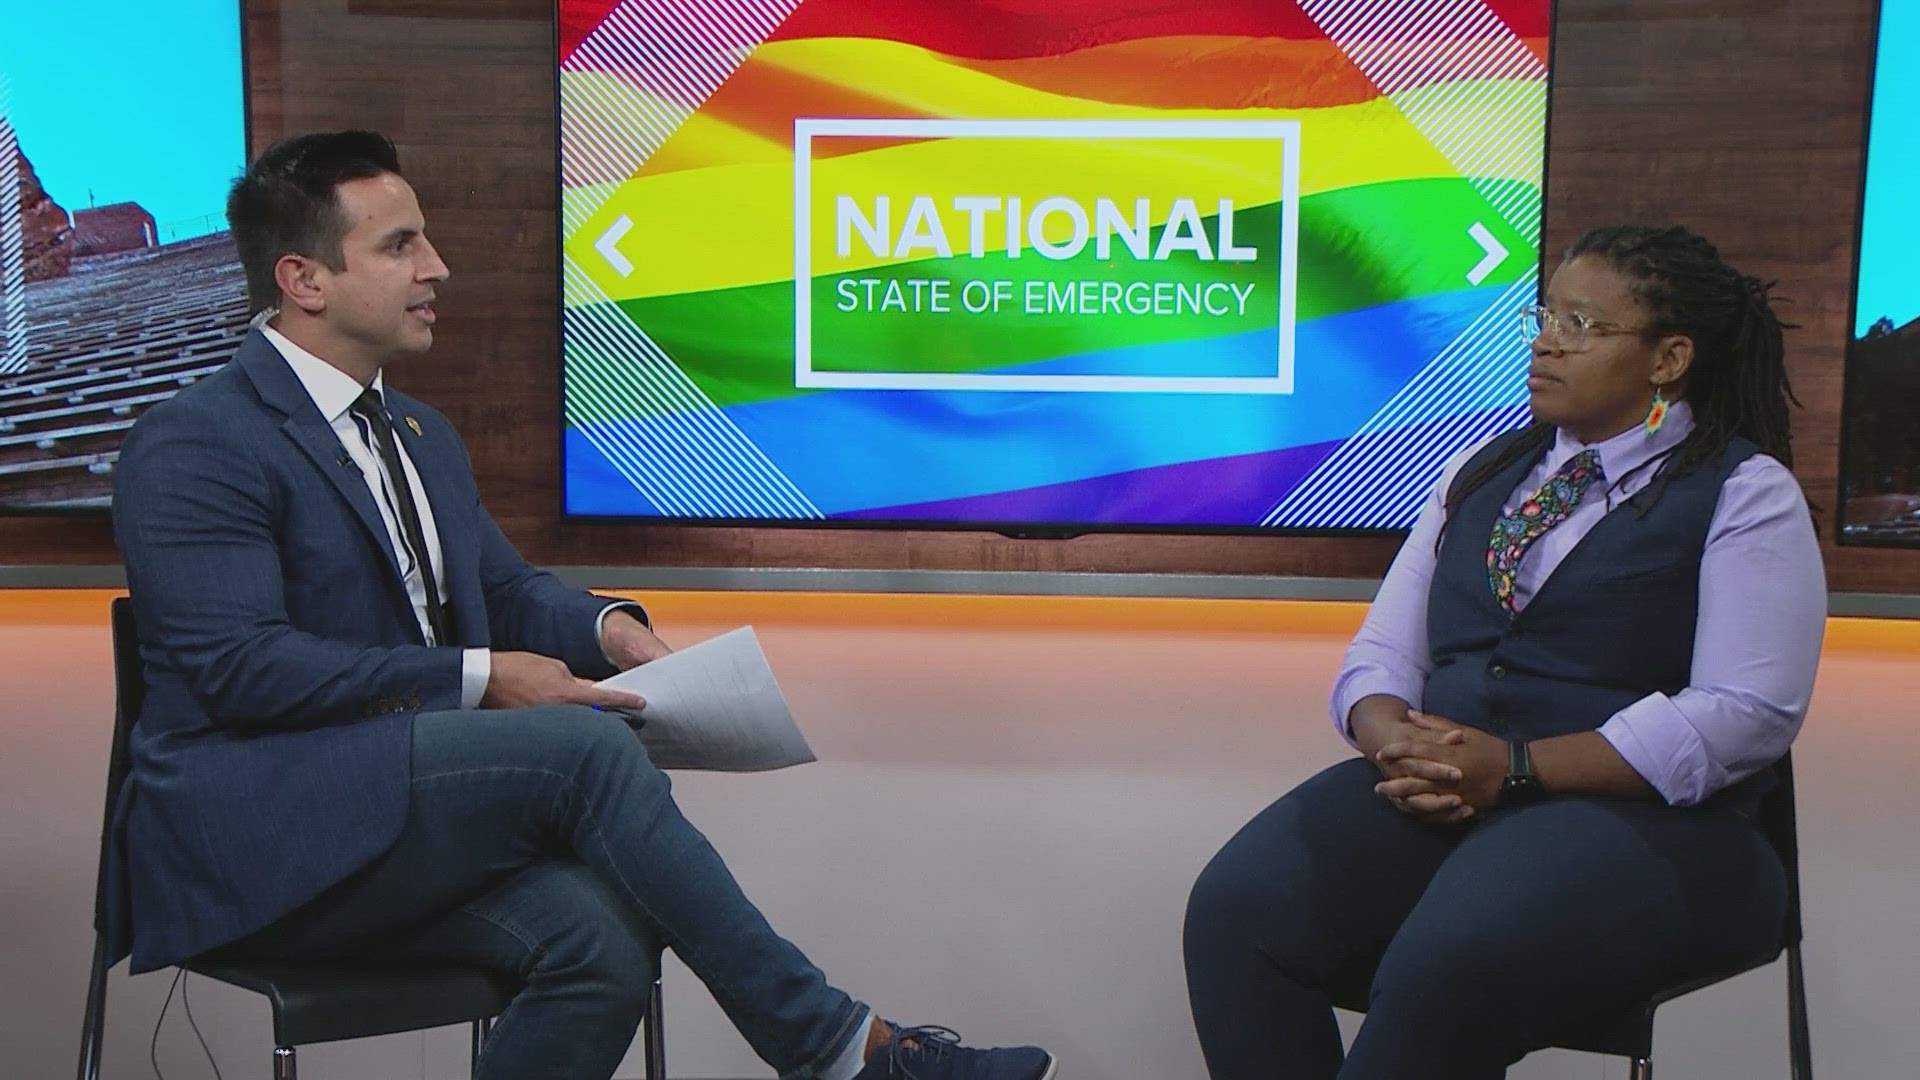 Executive Director of One Colorado Nadine Bridges discusses what's contributing to the new state of emergency for LGBTQ+ Americans.